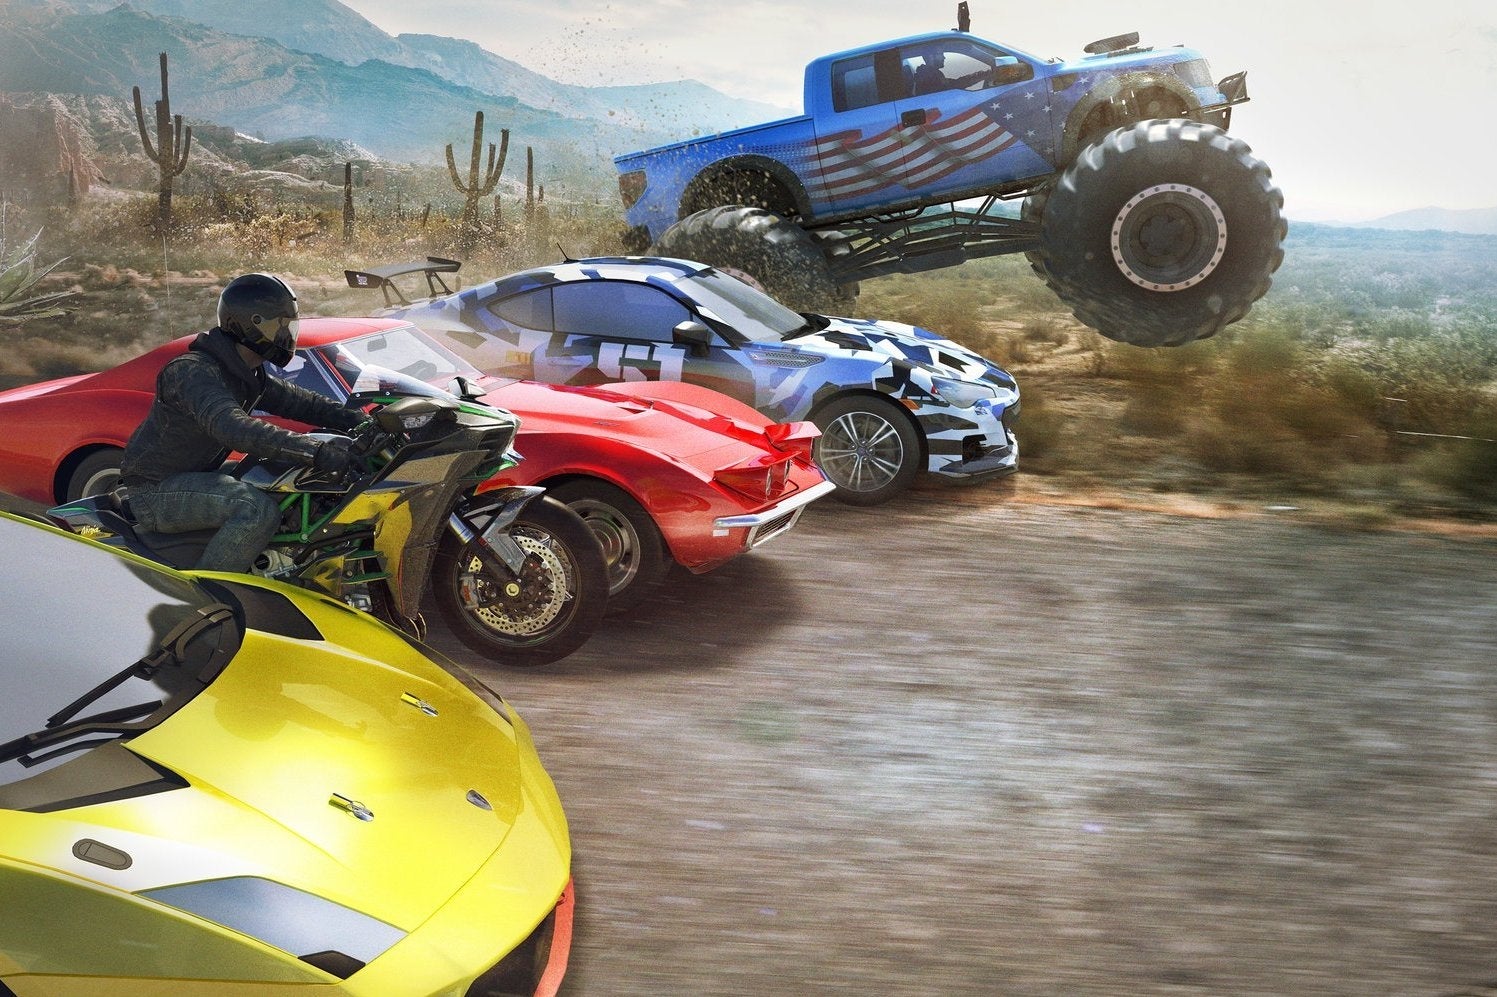 Image for 1000 The Crew Wild Run closed beta keys up for grabs